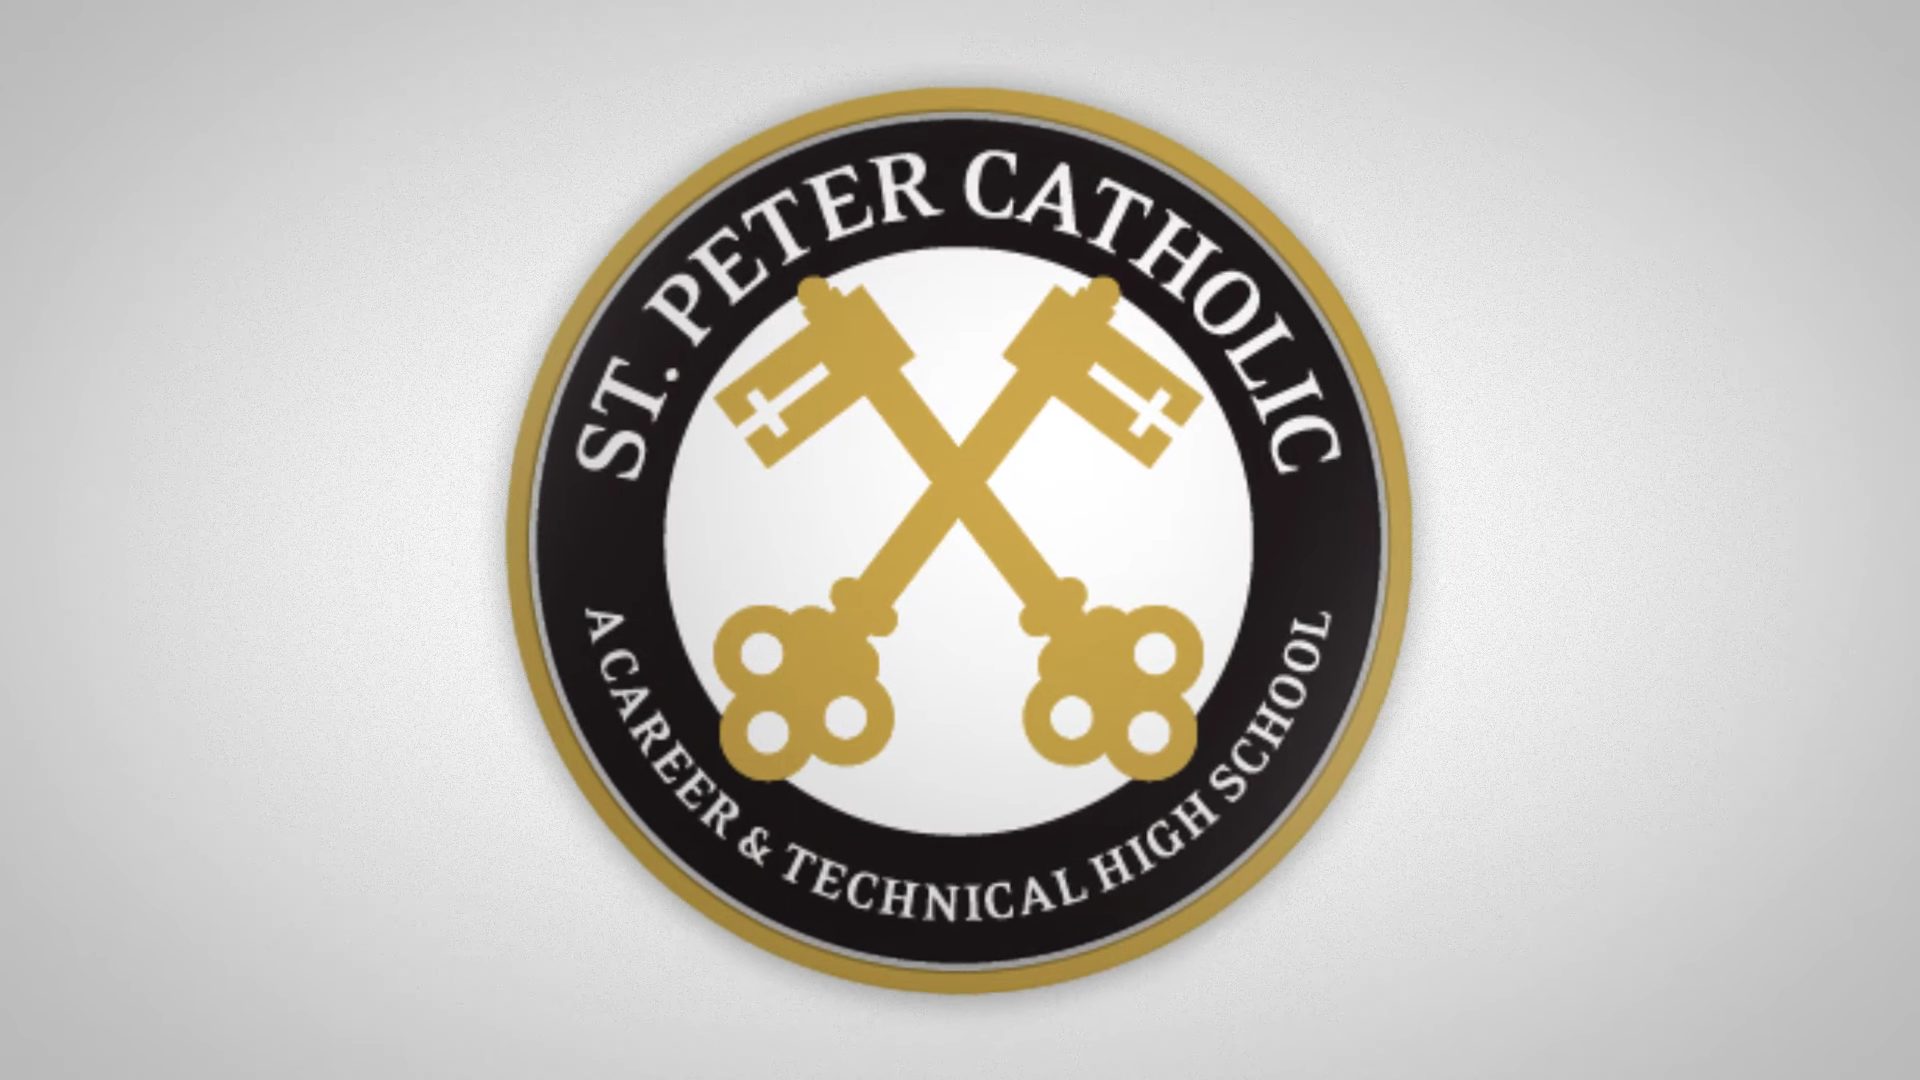 Houston's planned St. Peter Catholic Career and Technical High School raises $6.6M